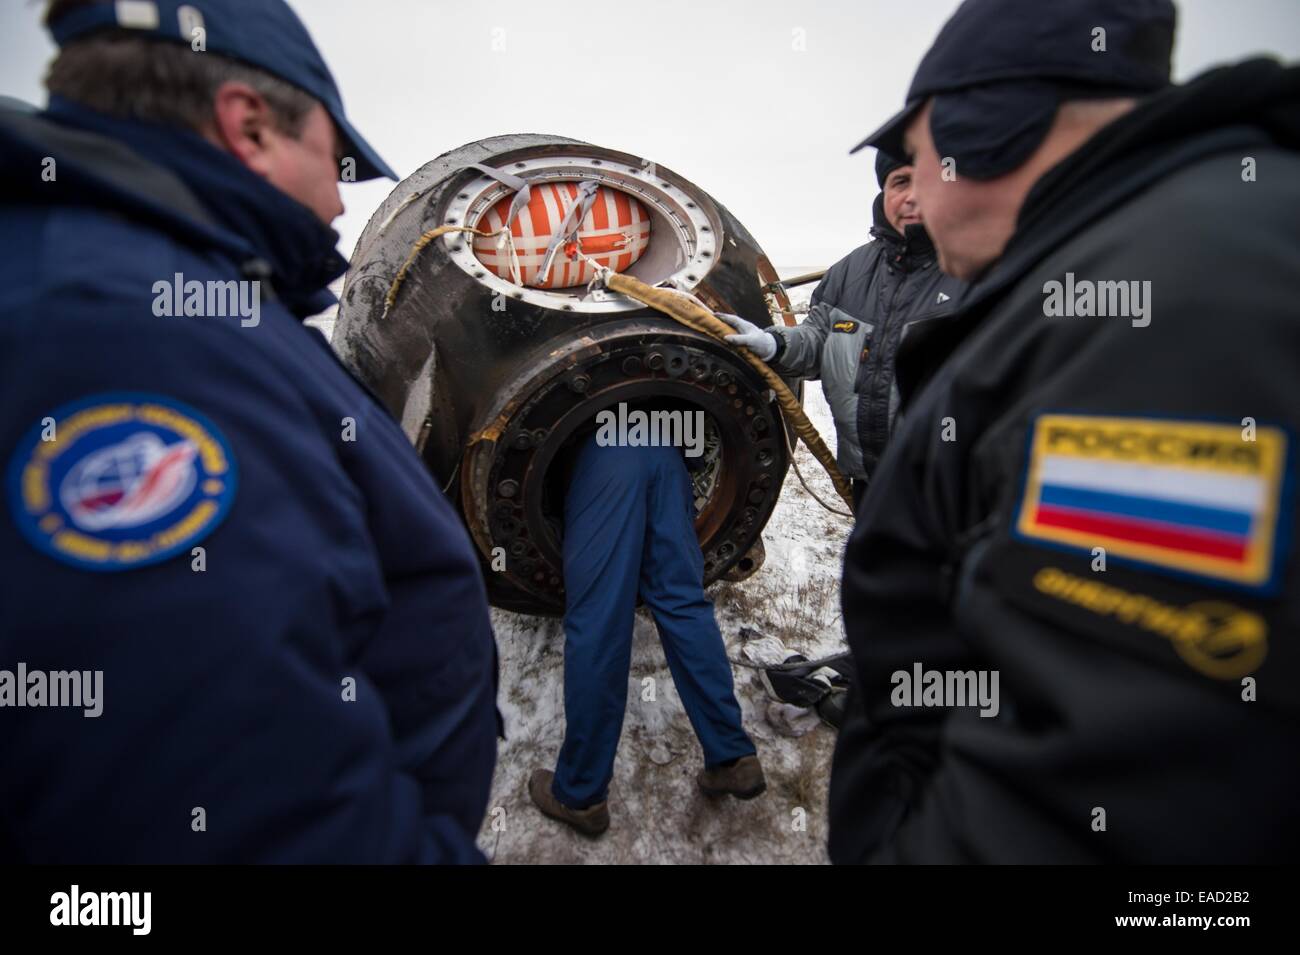 Russian Federal Space Agency ground personnel work to extract ISS Expedition 41 crew from the Soyuz TMA-13M space capsule just minutes after they landed in a remote area November 10, 2014 near Arkalyk, Kazakhstan. Suraev, Wiseman and Gerst returned to Earth after more than five months onboard the International Space Station where they served as members of the Expedition 40 and 41 crews. Stock Photo